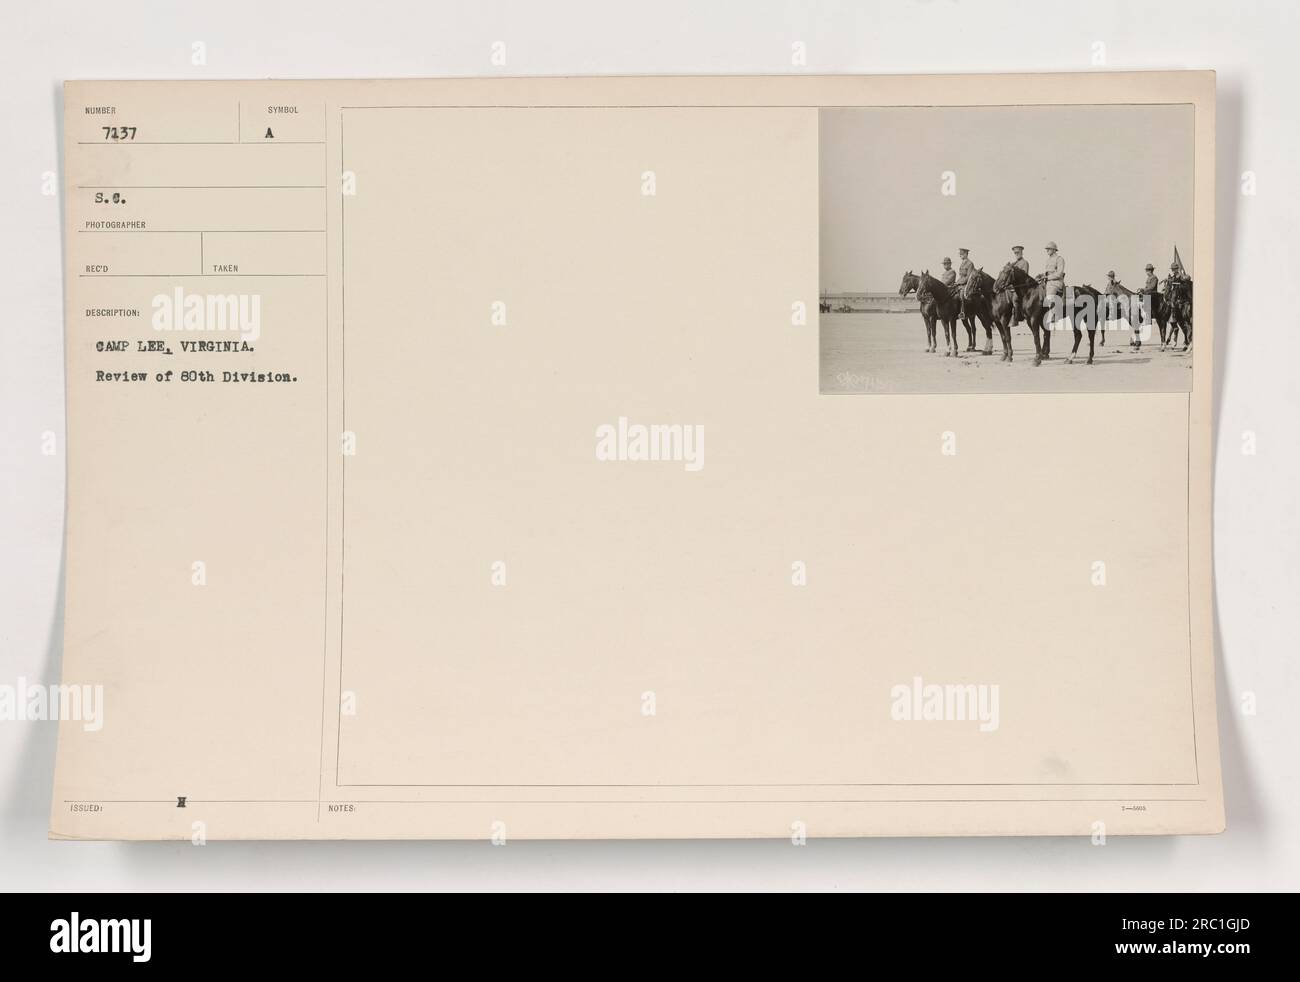 Photographs of American Military Activities during world war one - 111-SC-7137 Captured soldiers being reviewed at Camp Lee, Virginia. Review of the 80th Division. Stock Photo